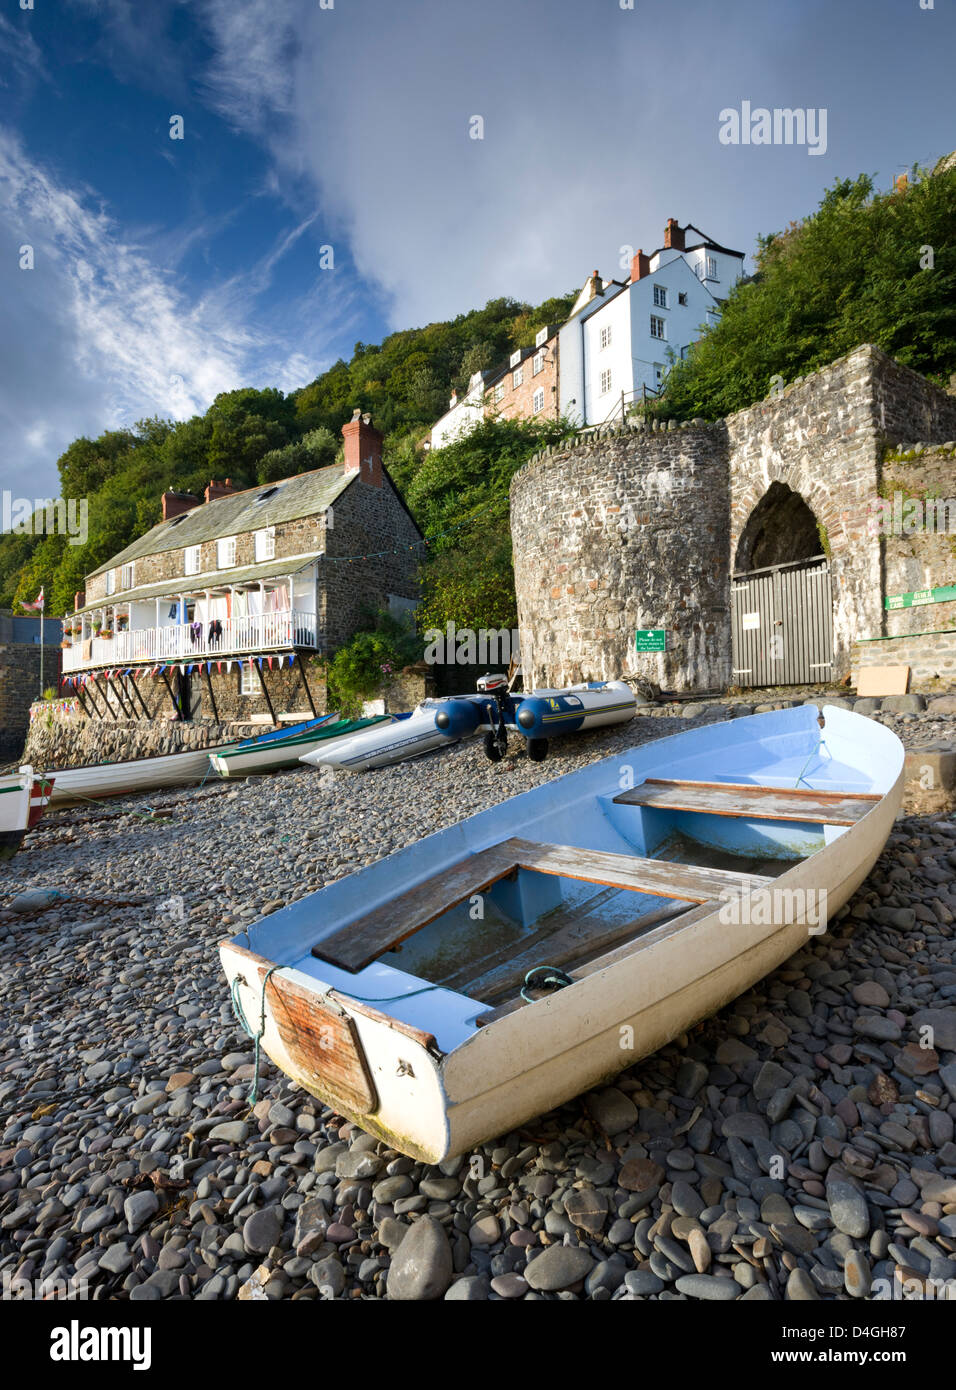 Fishing boat on the pebble beach in Clovelly harbour, Devon, England. Autumn (September). Stock Photo